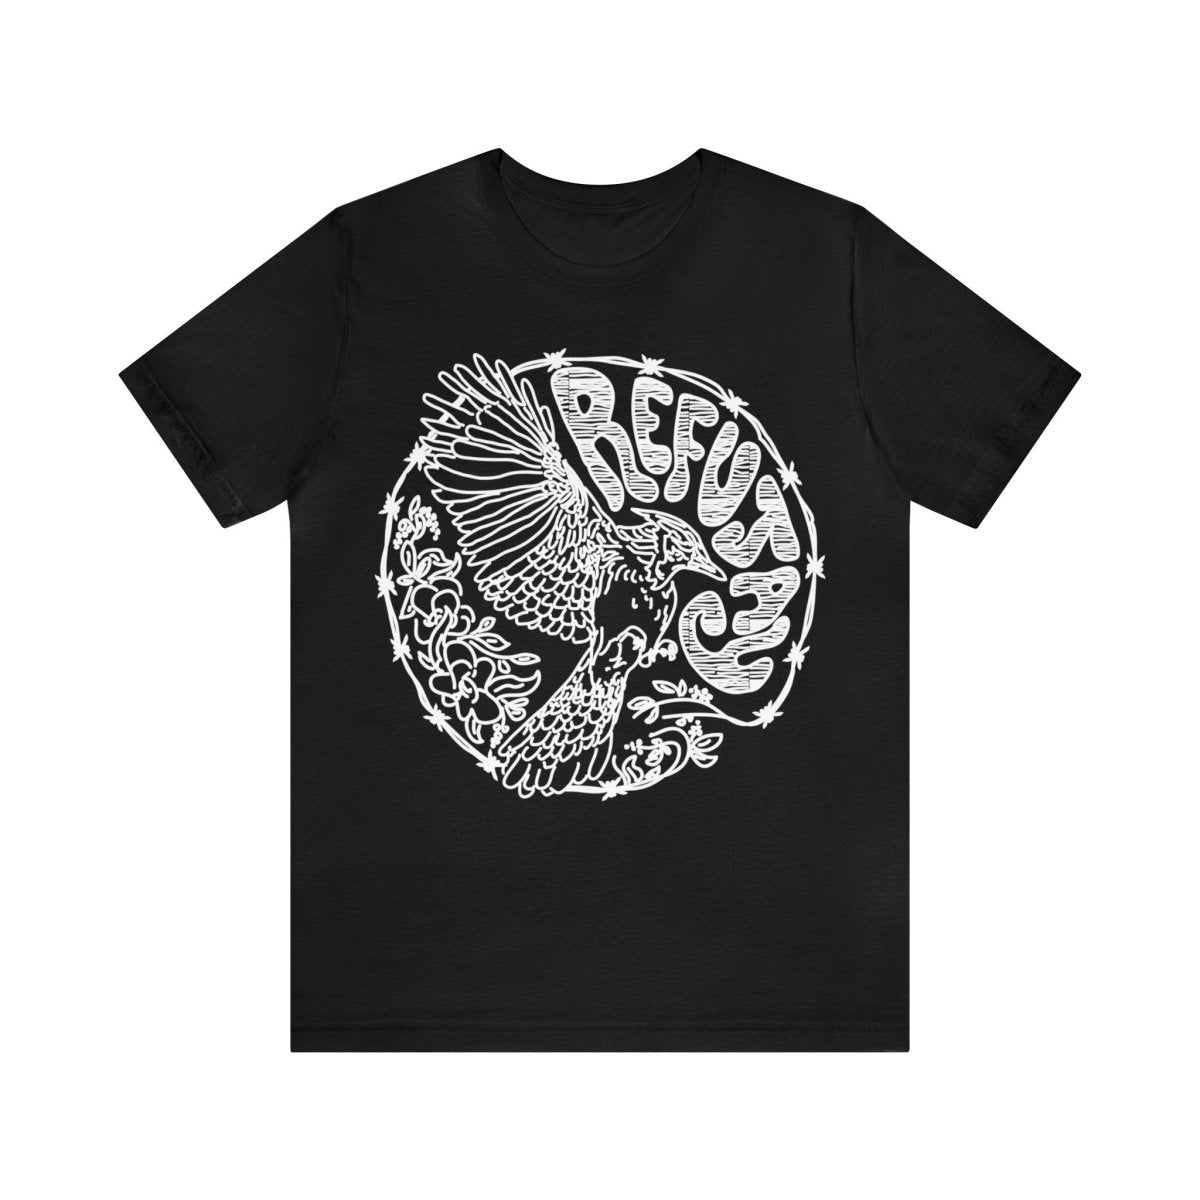 Refujay Premium T-Shirt, Break Out, Fly, Live Free Inspiration